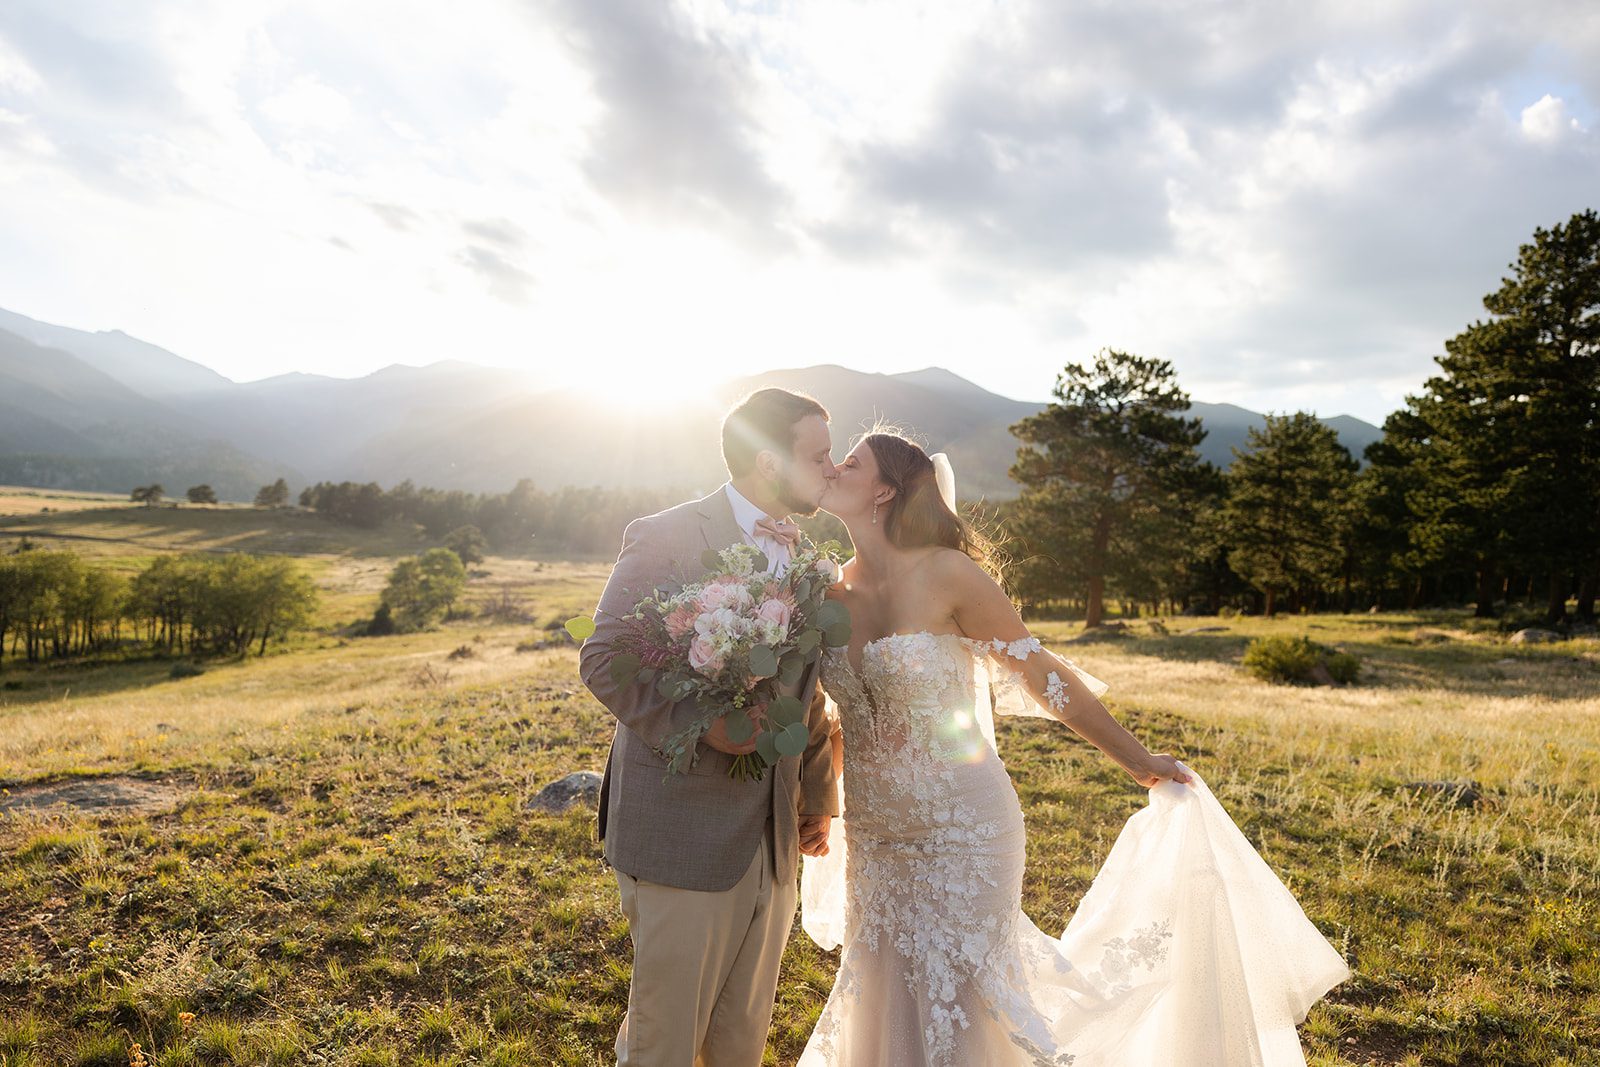 The bride and groom kiss as the sunlight dances on their face. 